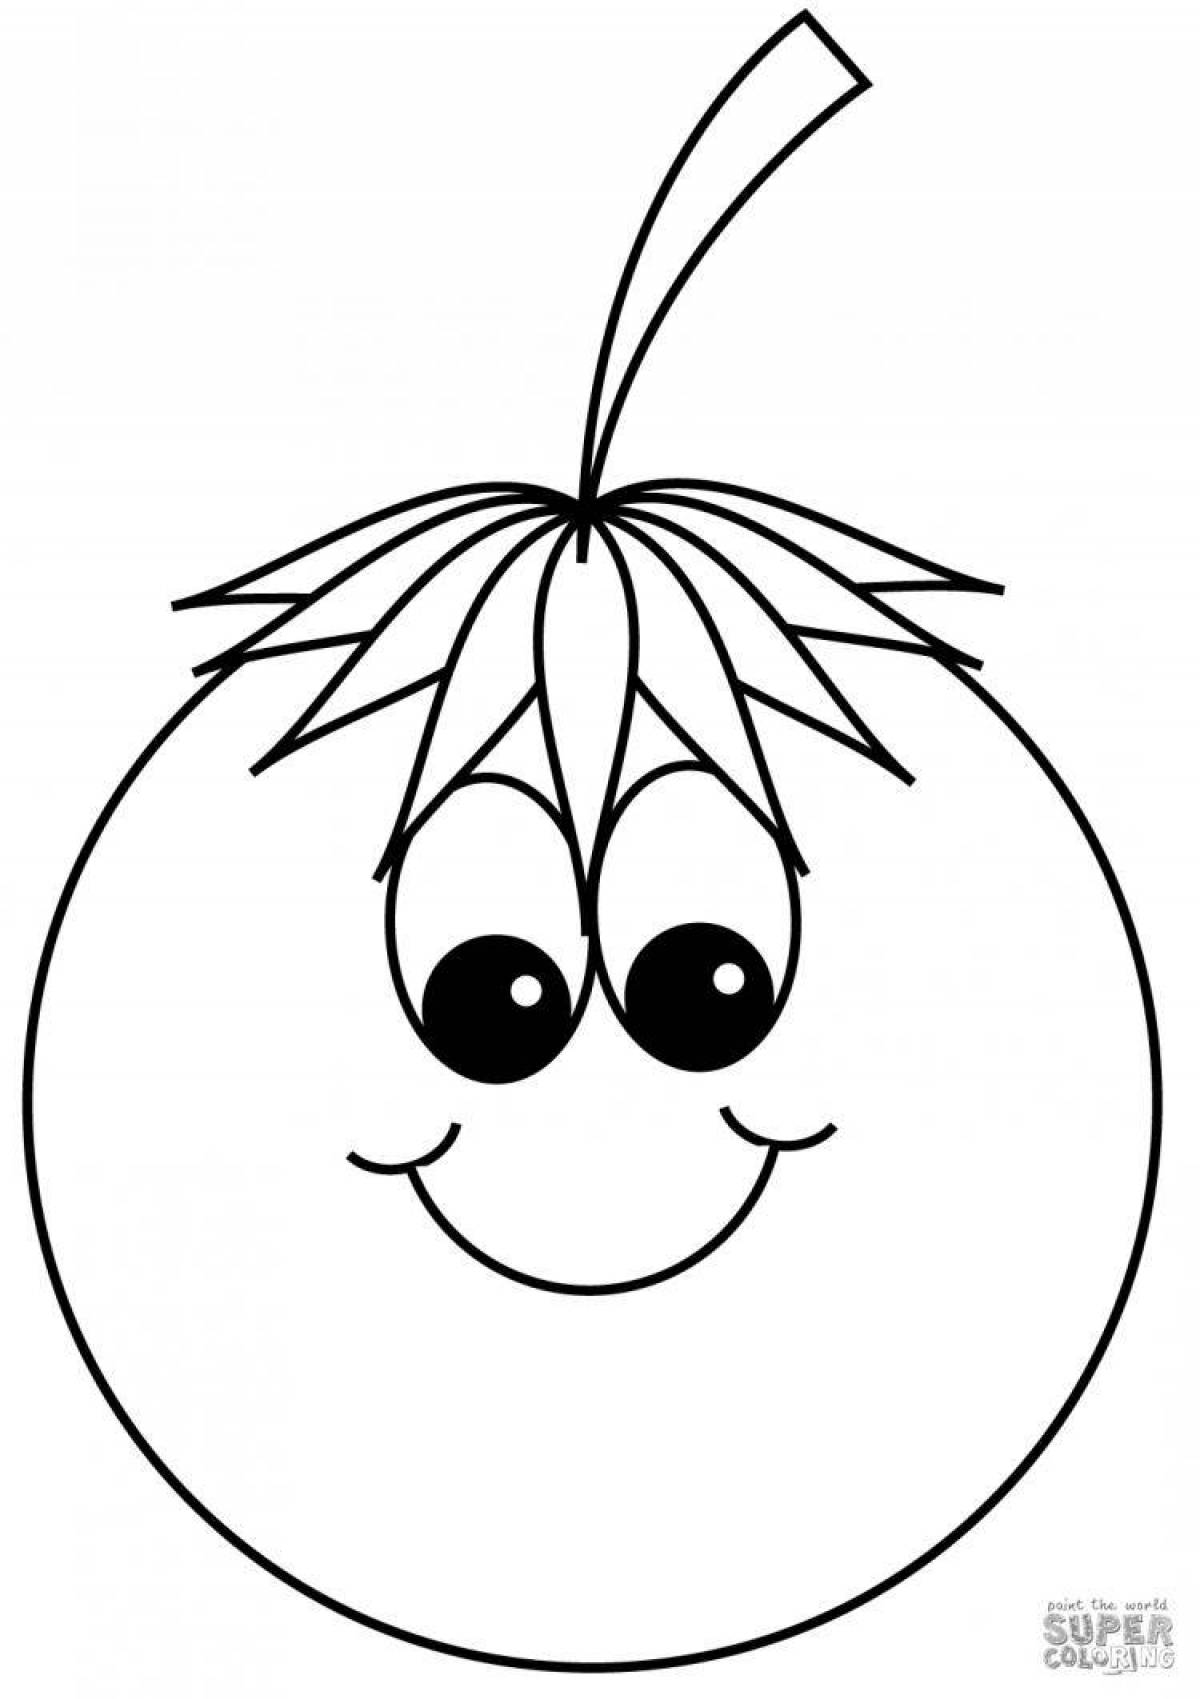 Dazzling tomato coloring page